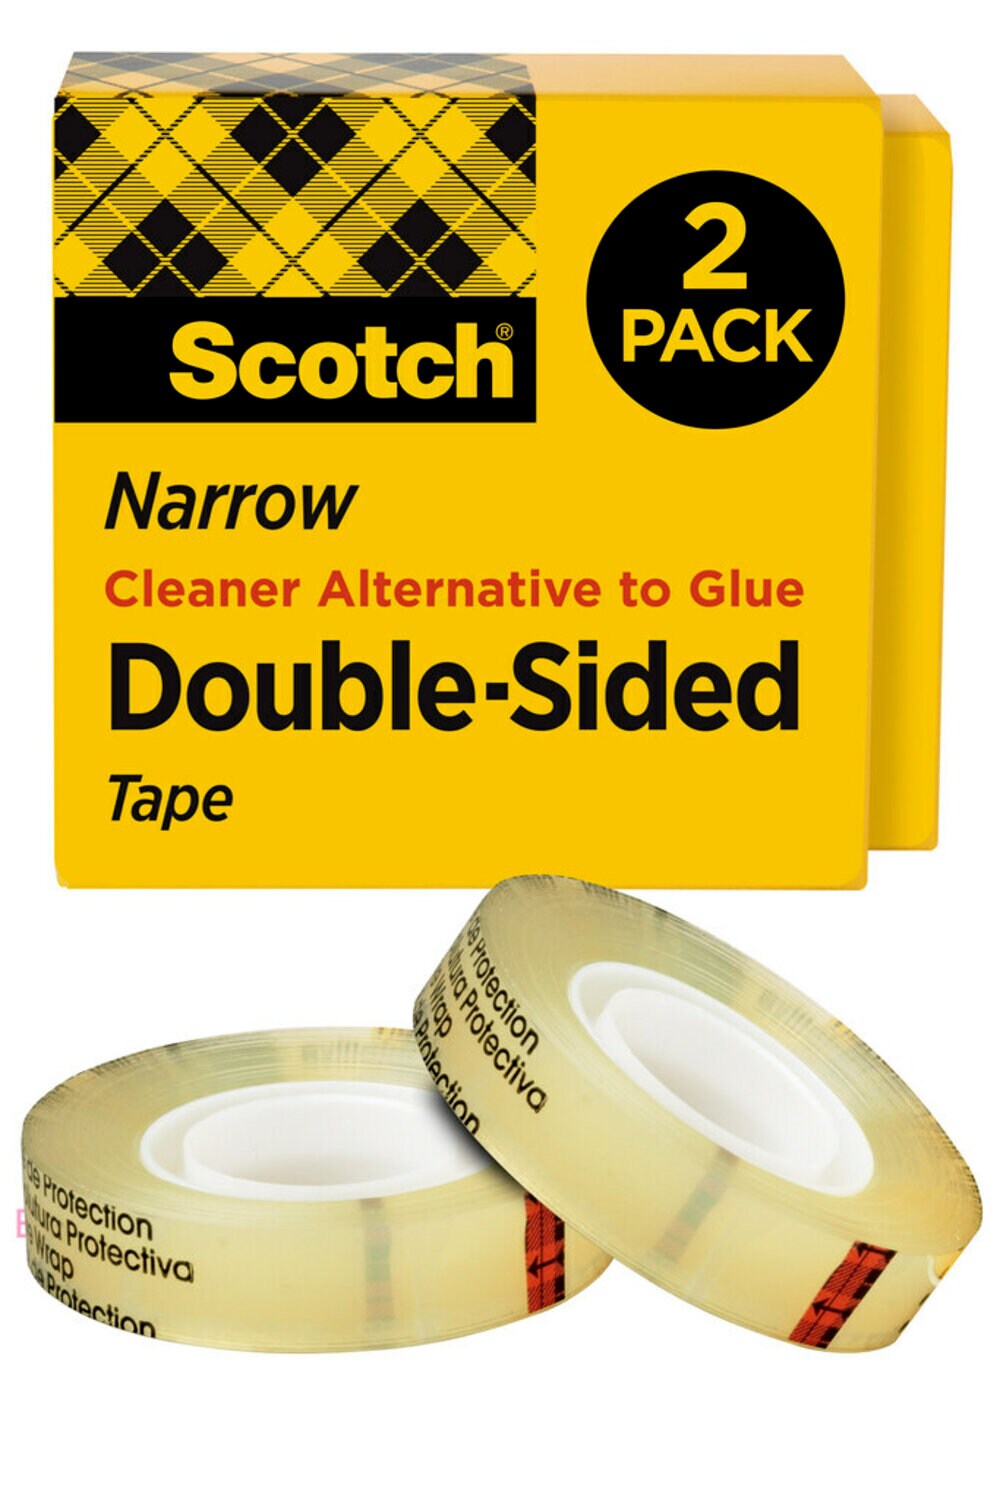 7010332909 - Scotch Double Sided Tape 665-2